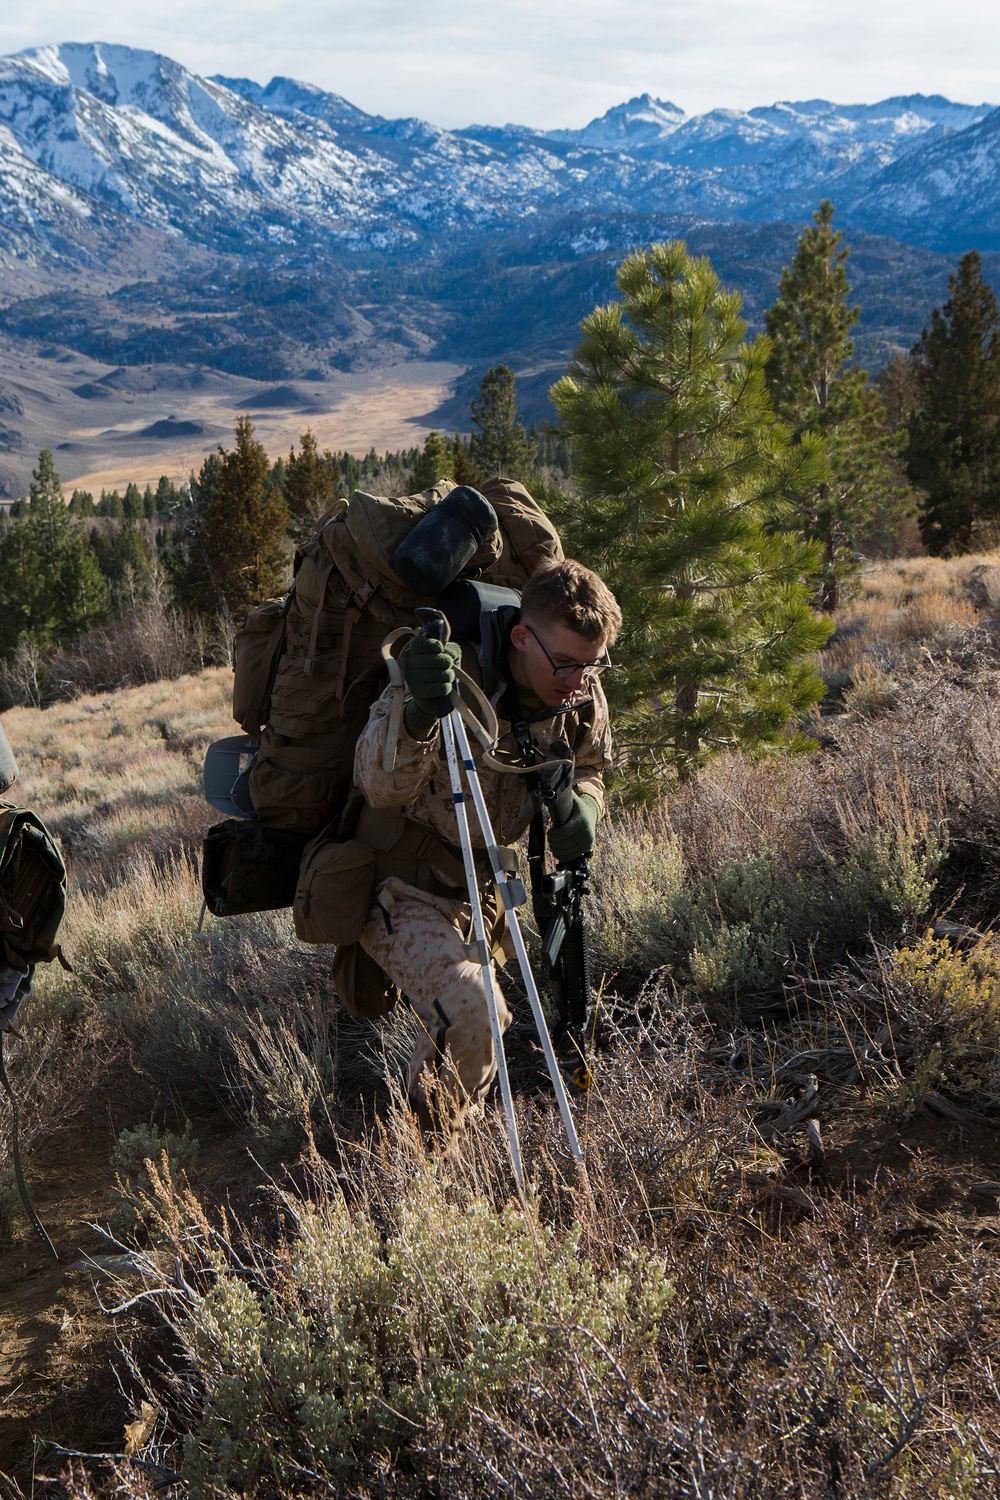 Marines with CLB-26 reach higher elevations